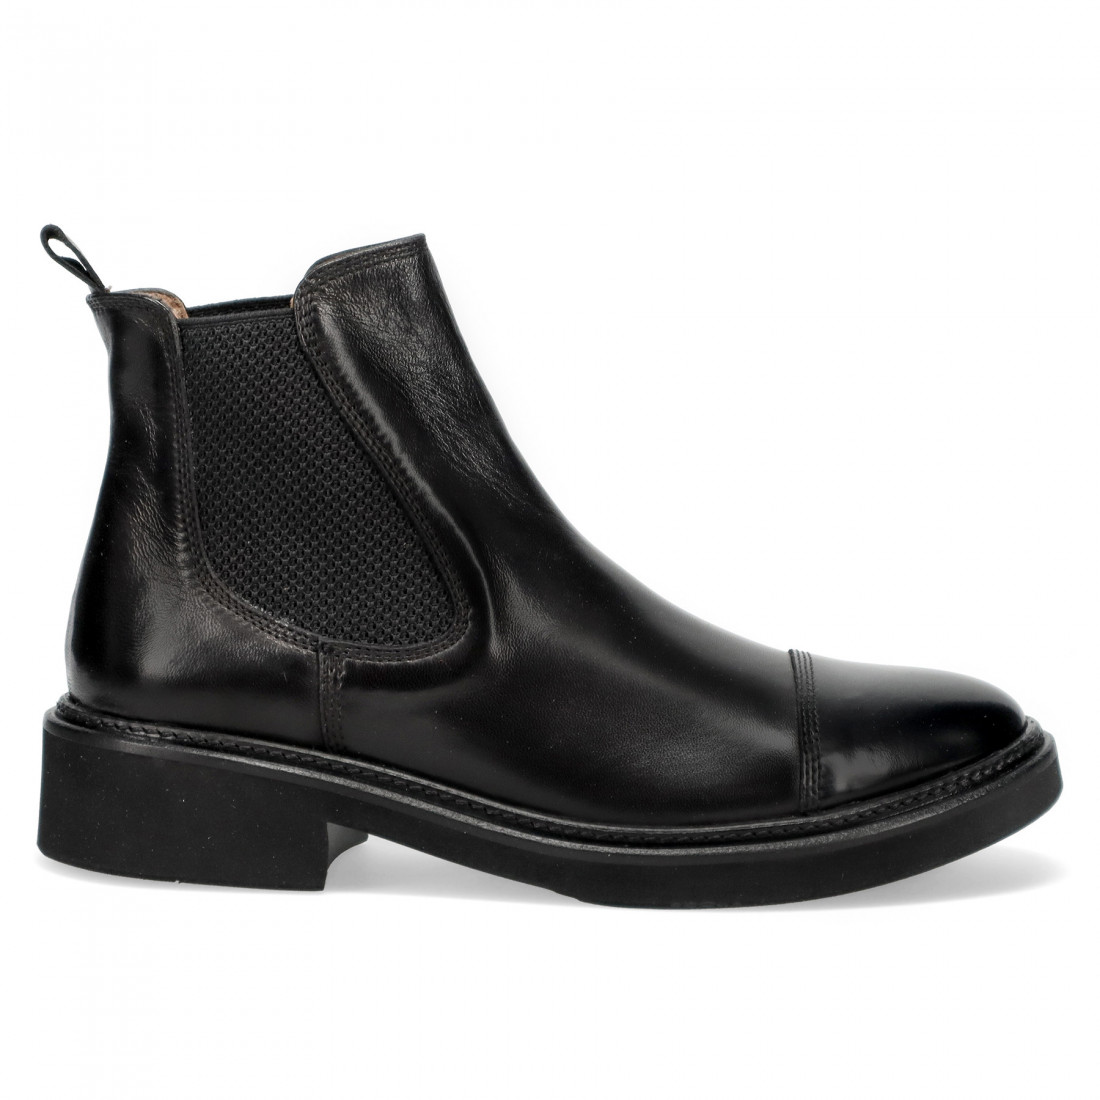 Calpierre woman's beatles boots in black leather